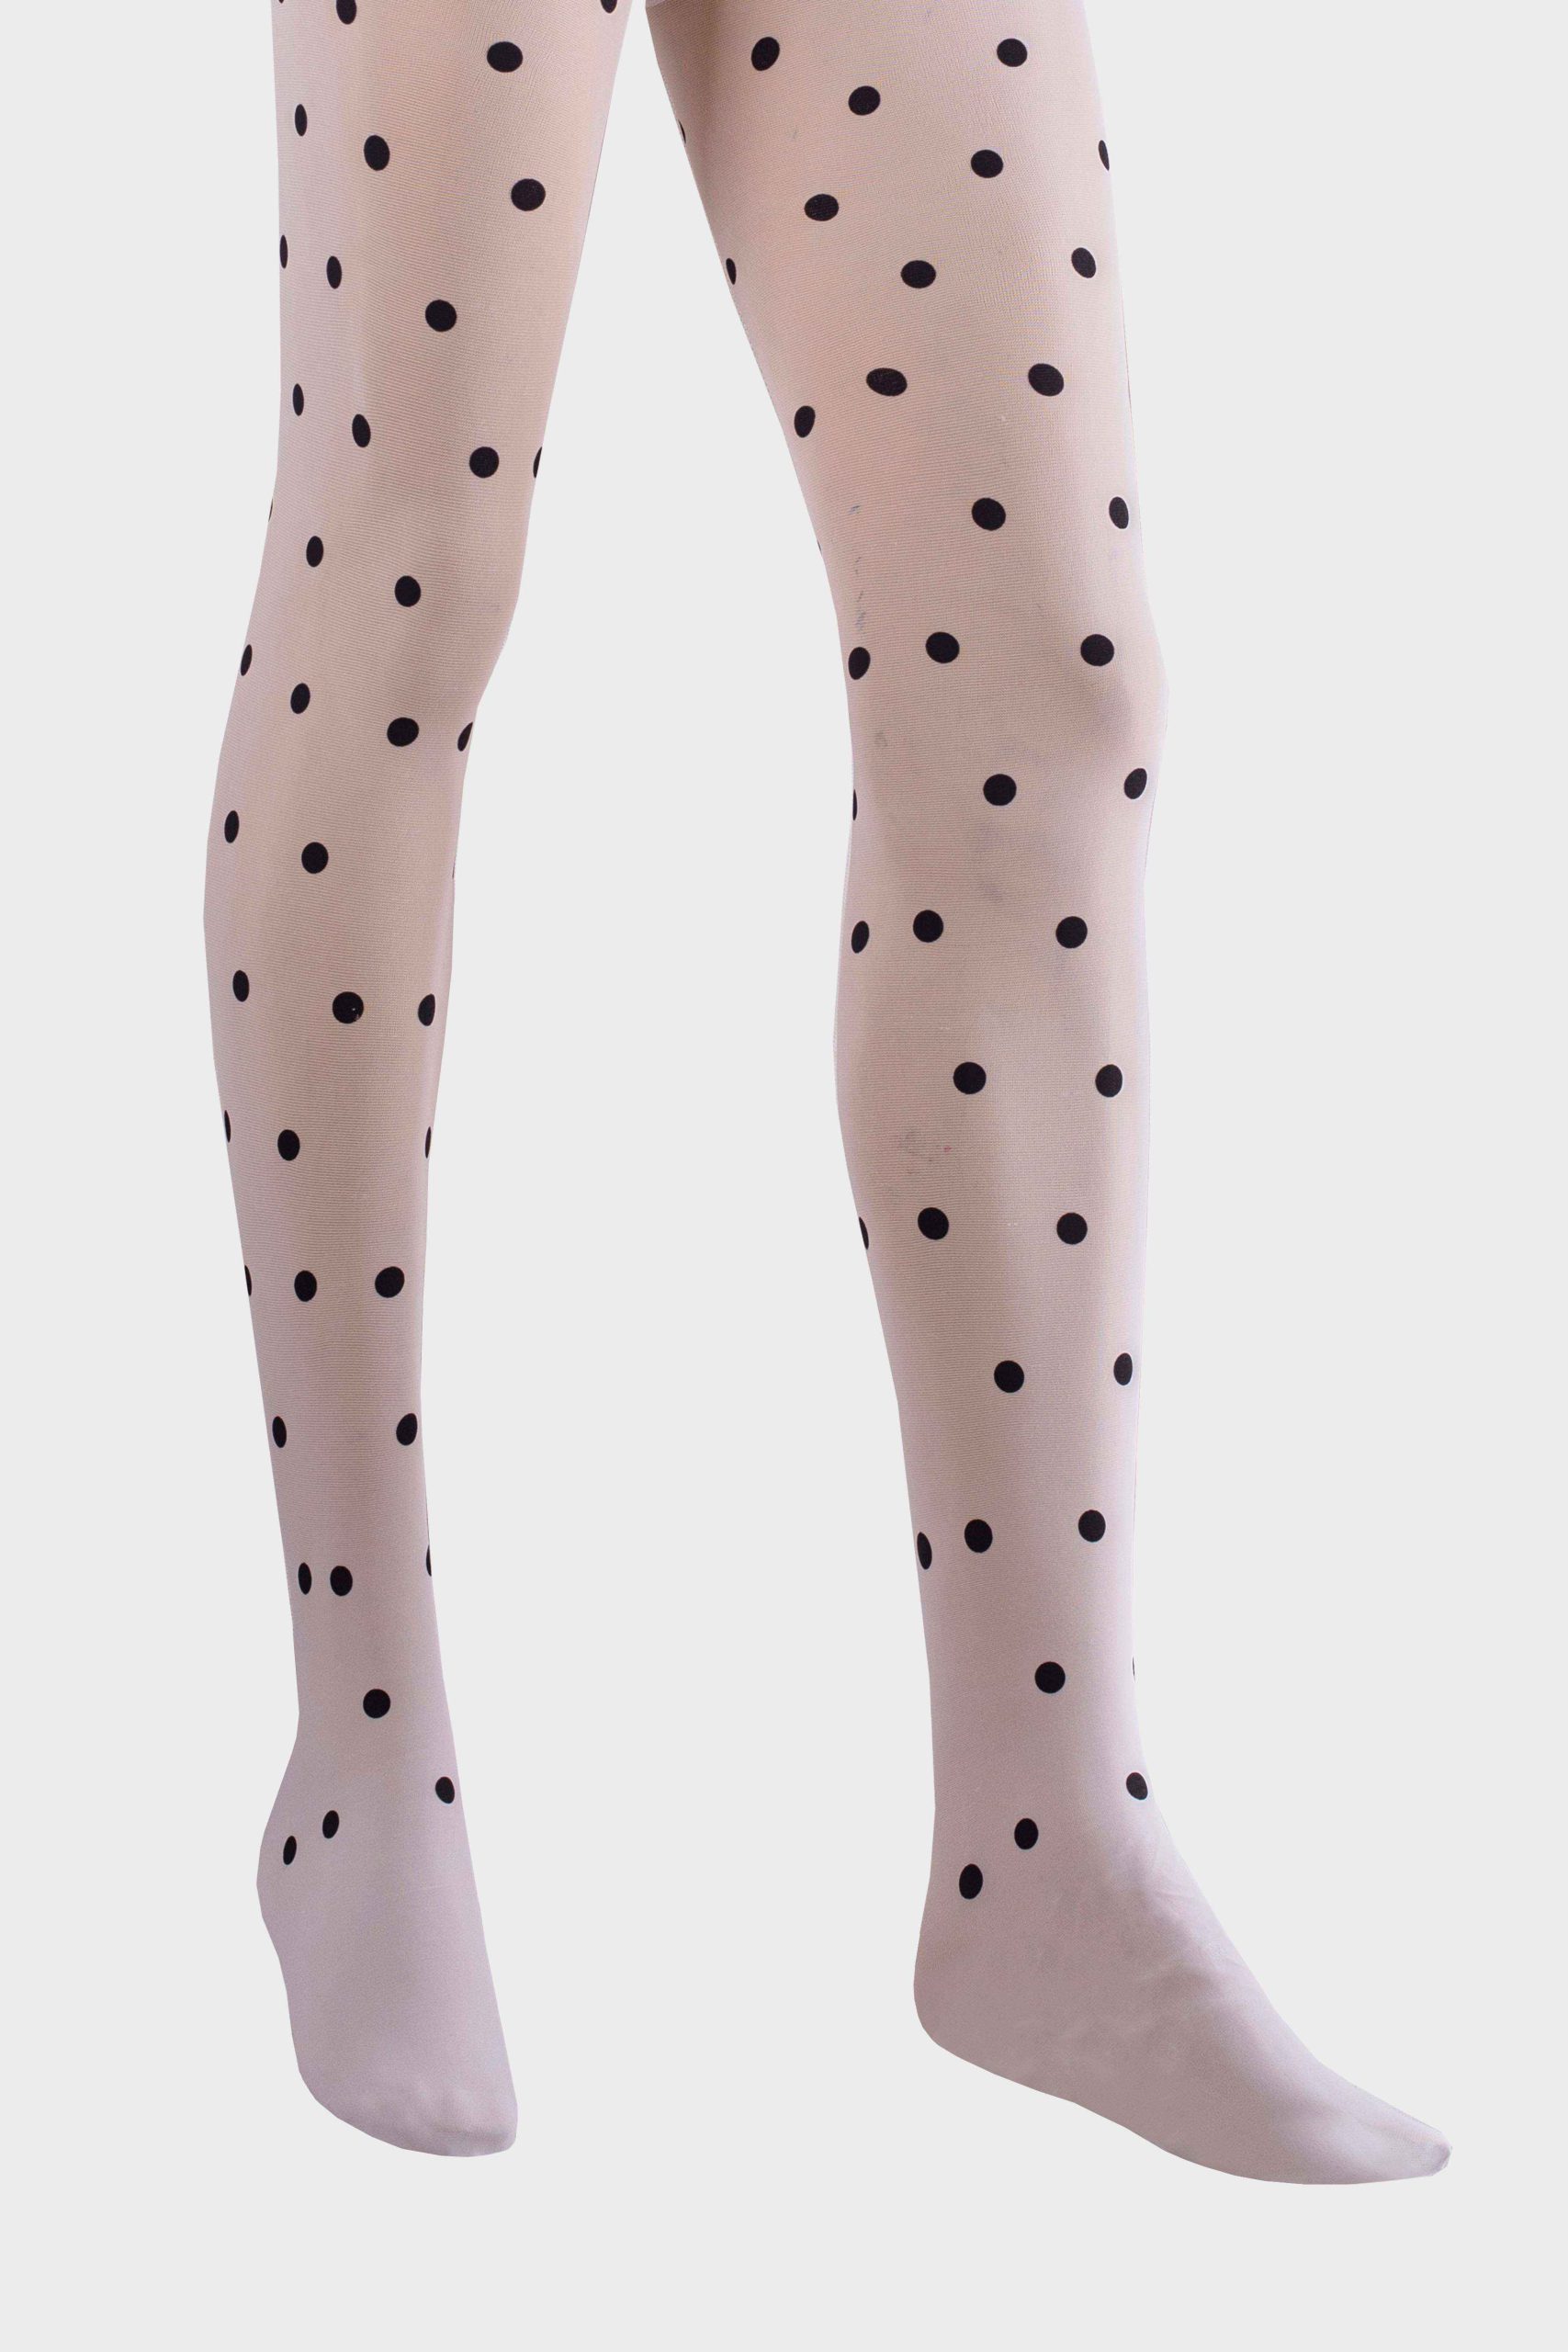 Is That The New Polka Dot Print Tights ??